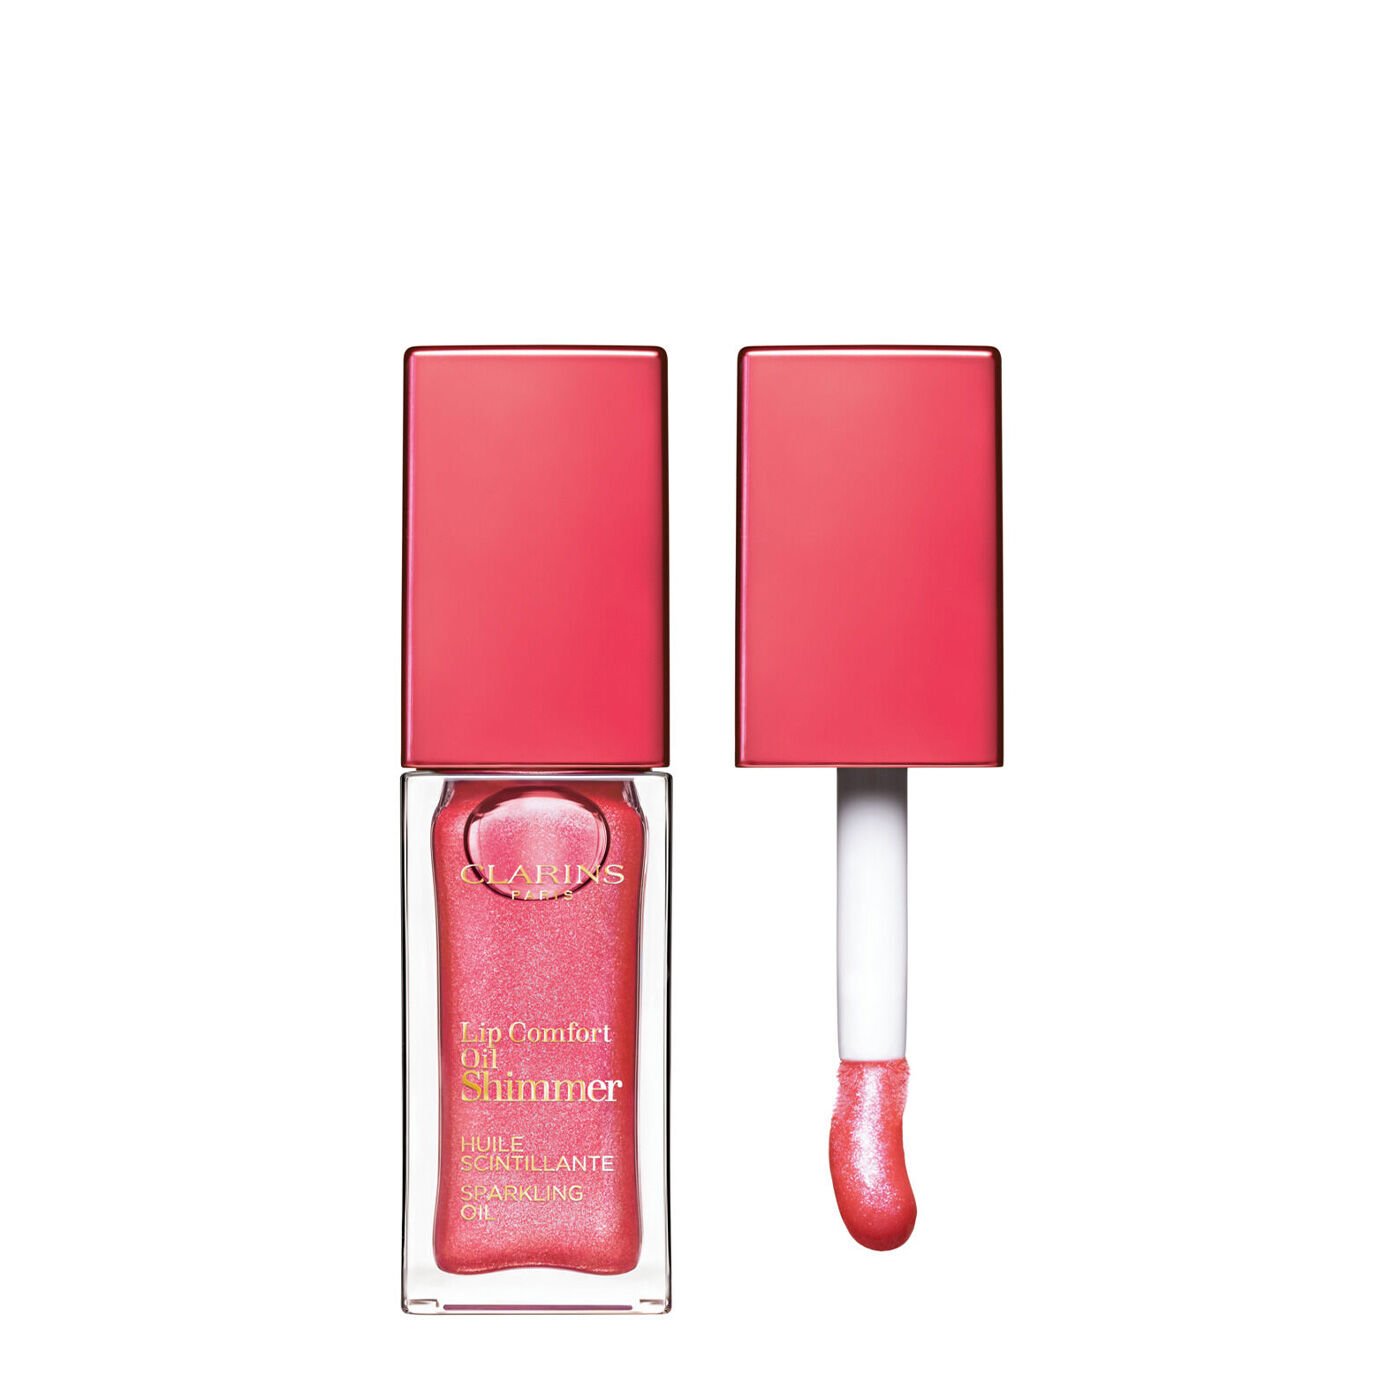 Shop Clarins Lip Comfort Oil Shimmer In 4 Intense Pink Lady